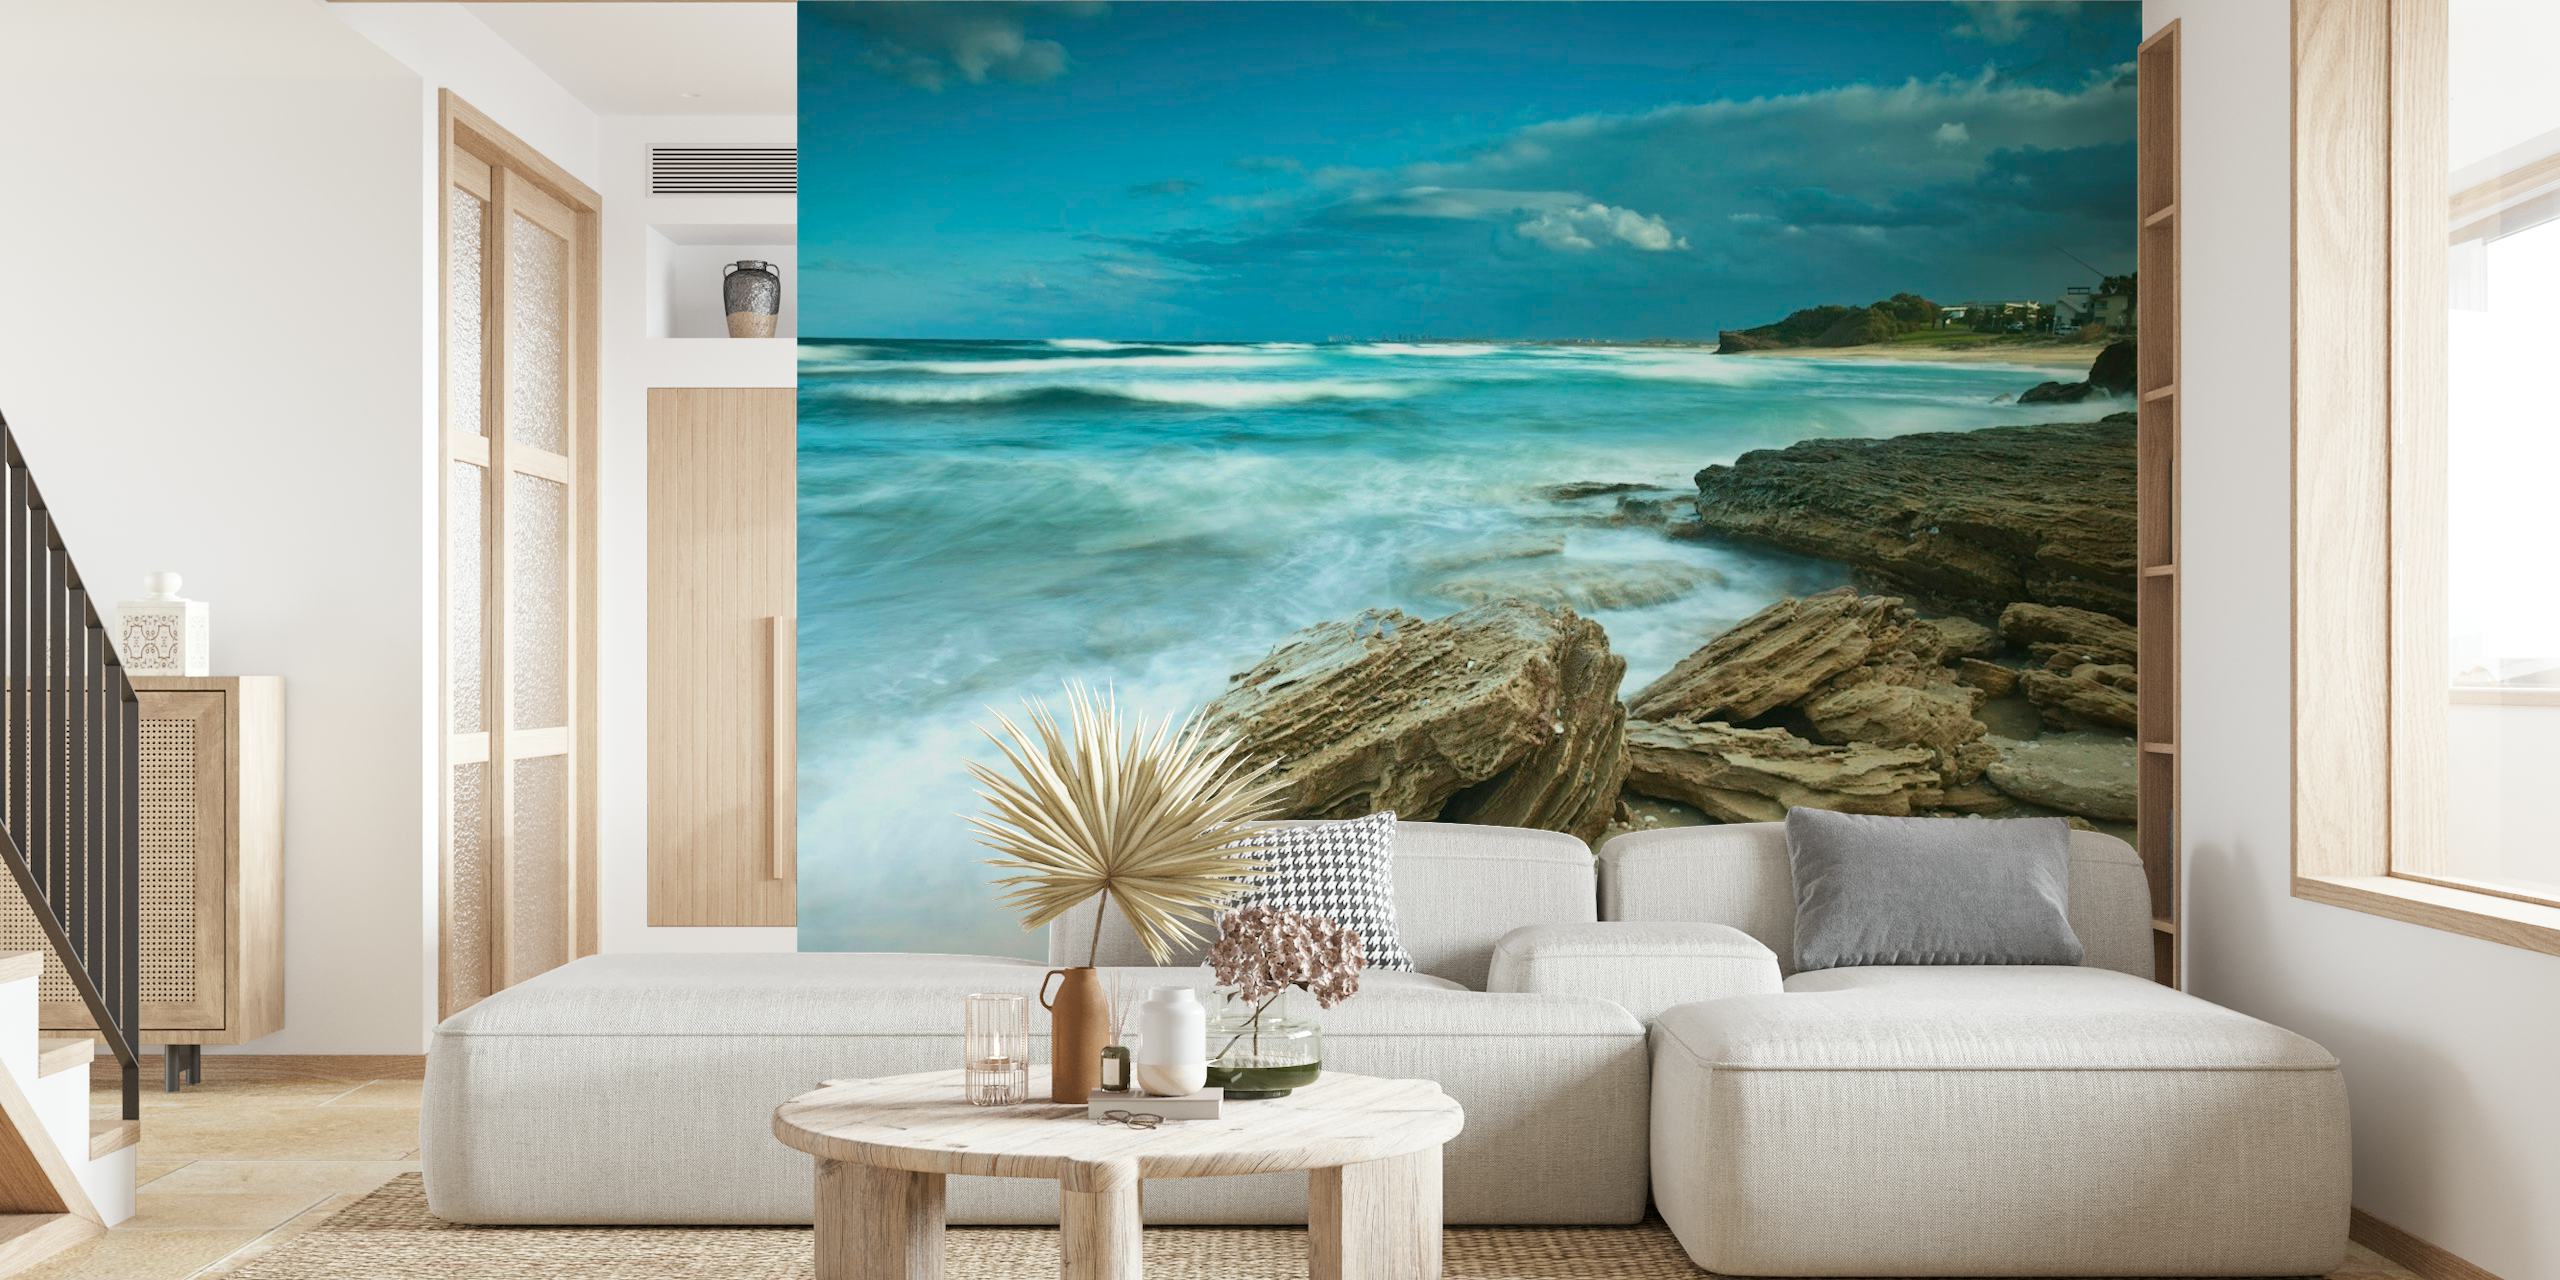 Rocky Coastline wall mural with waves crashing against the shore